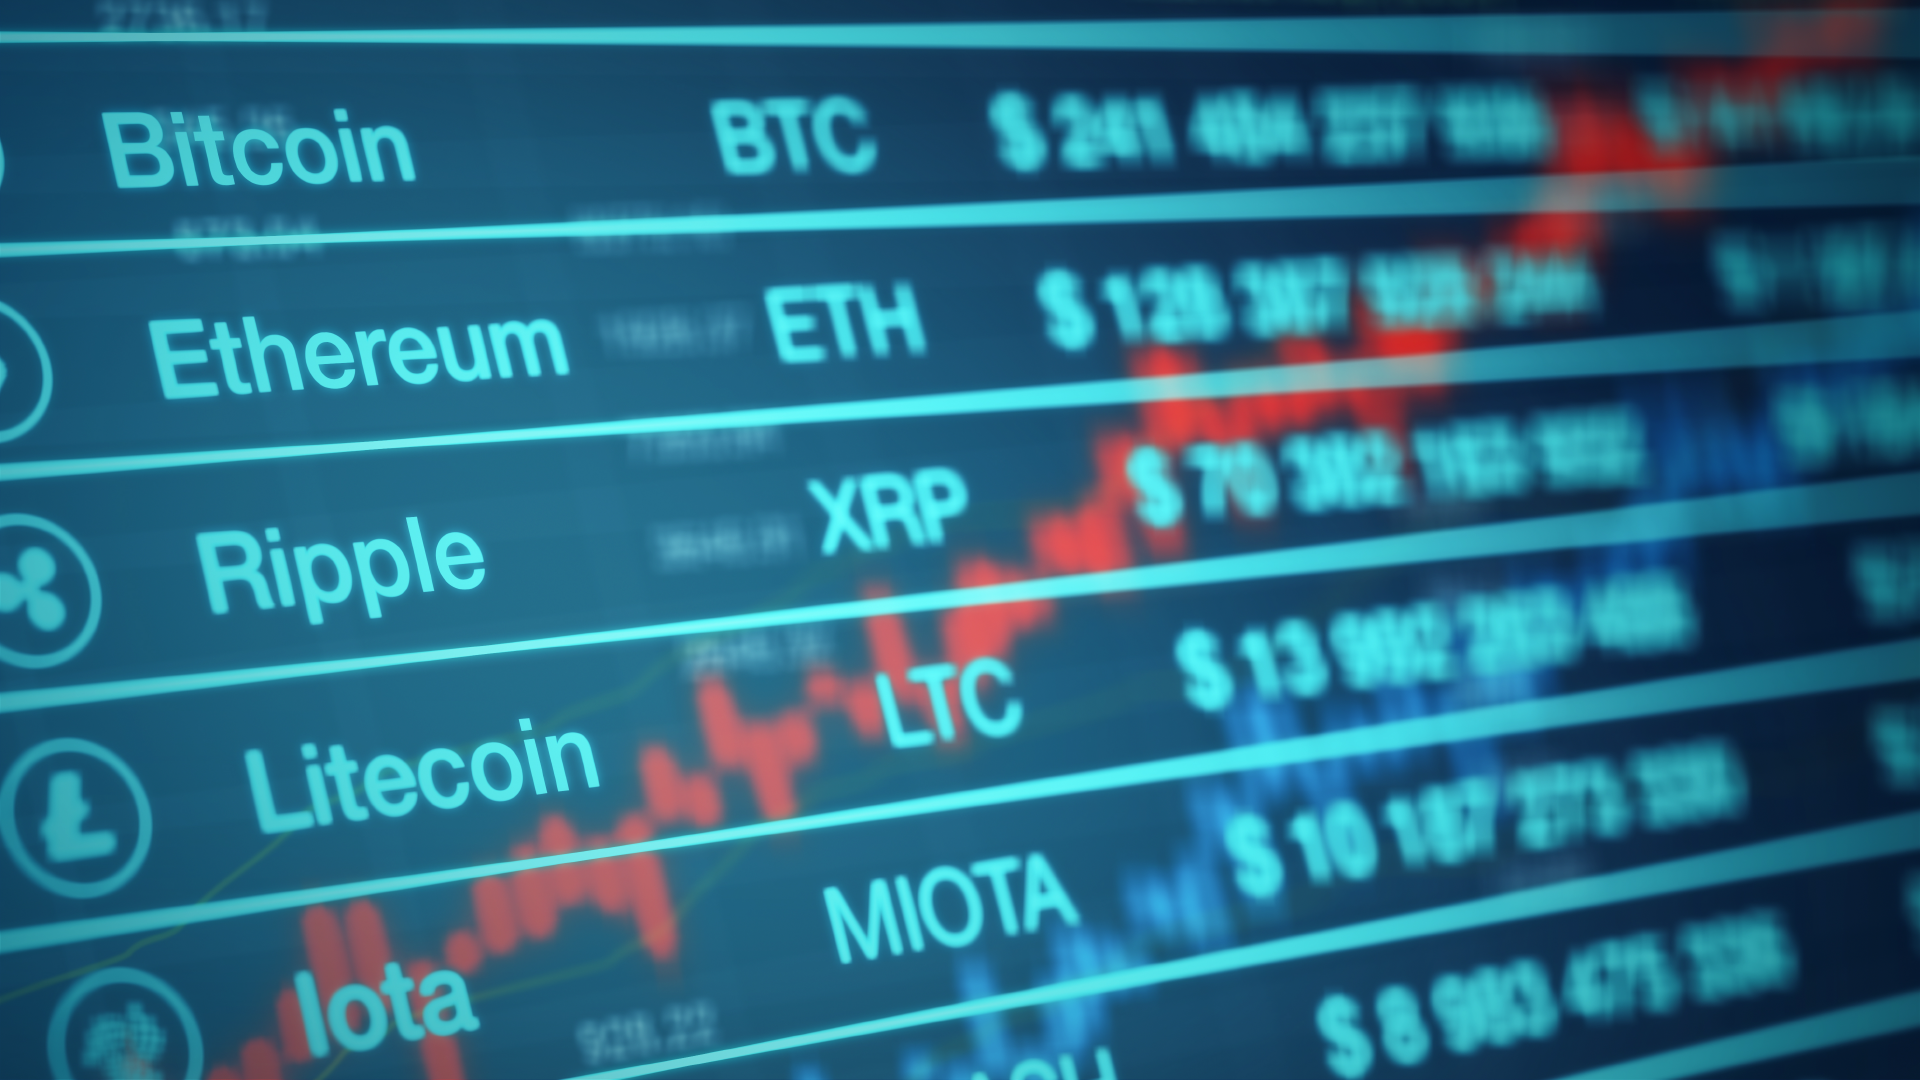 Top 10 Cryptocurrencies by Market Cap to Invest